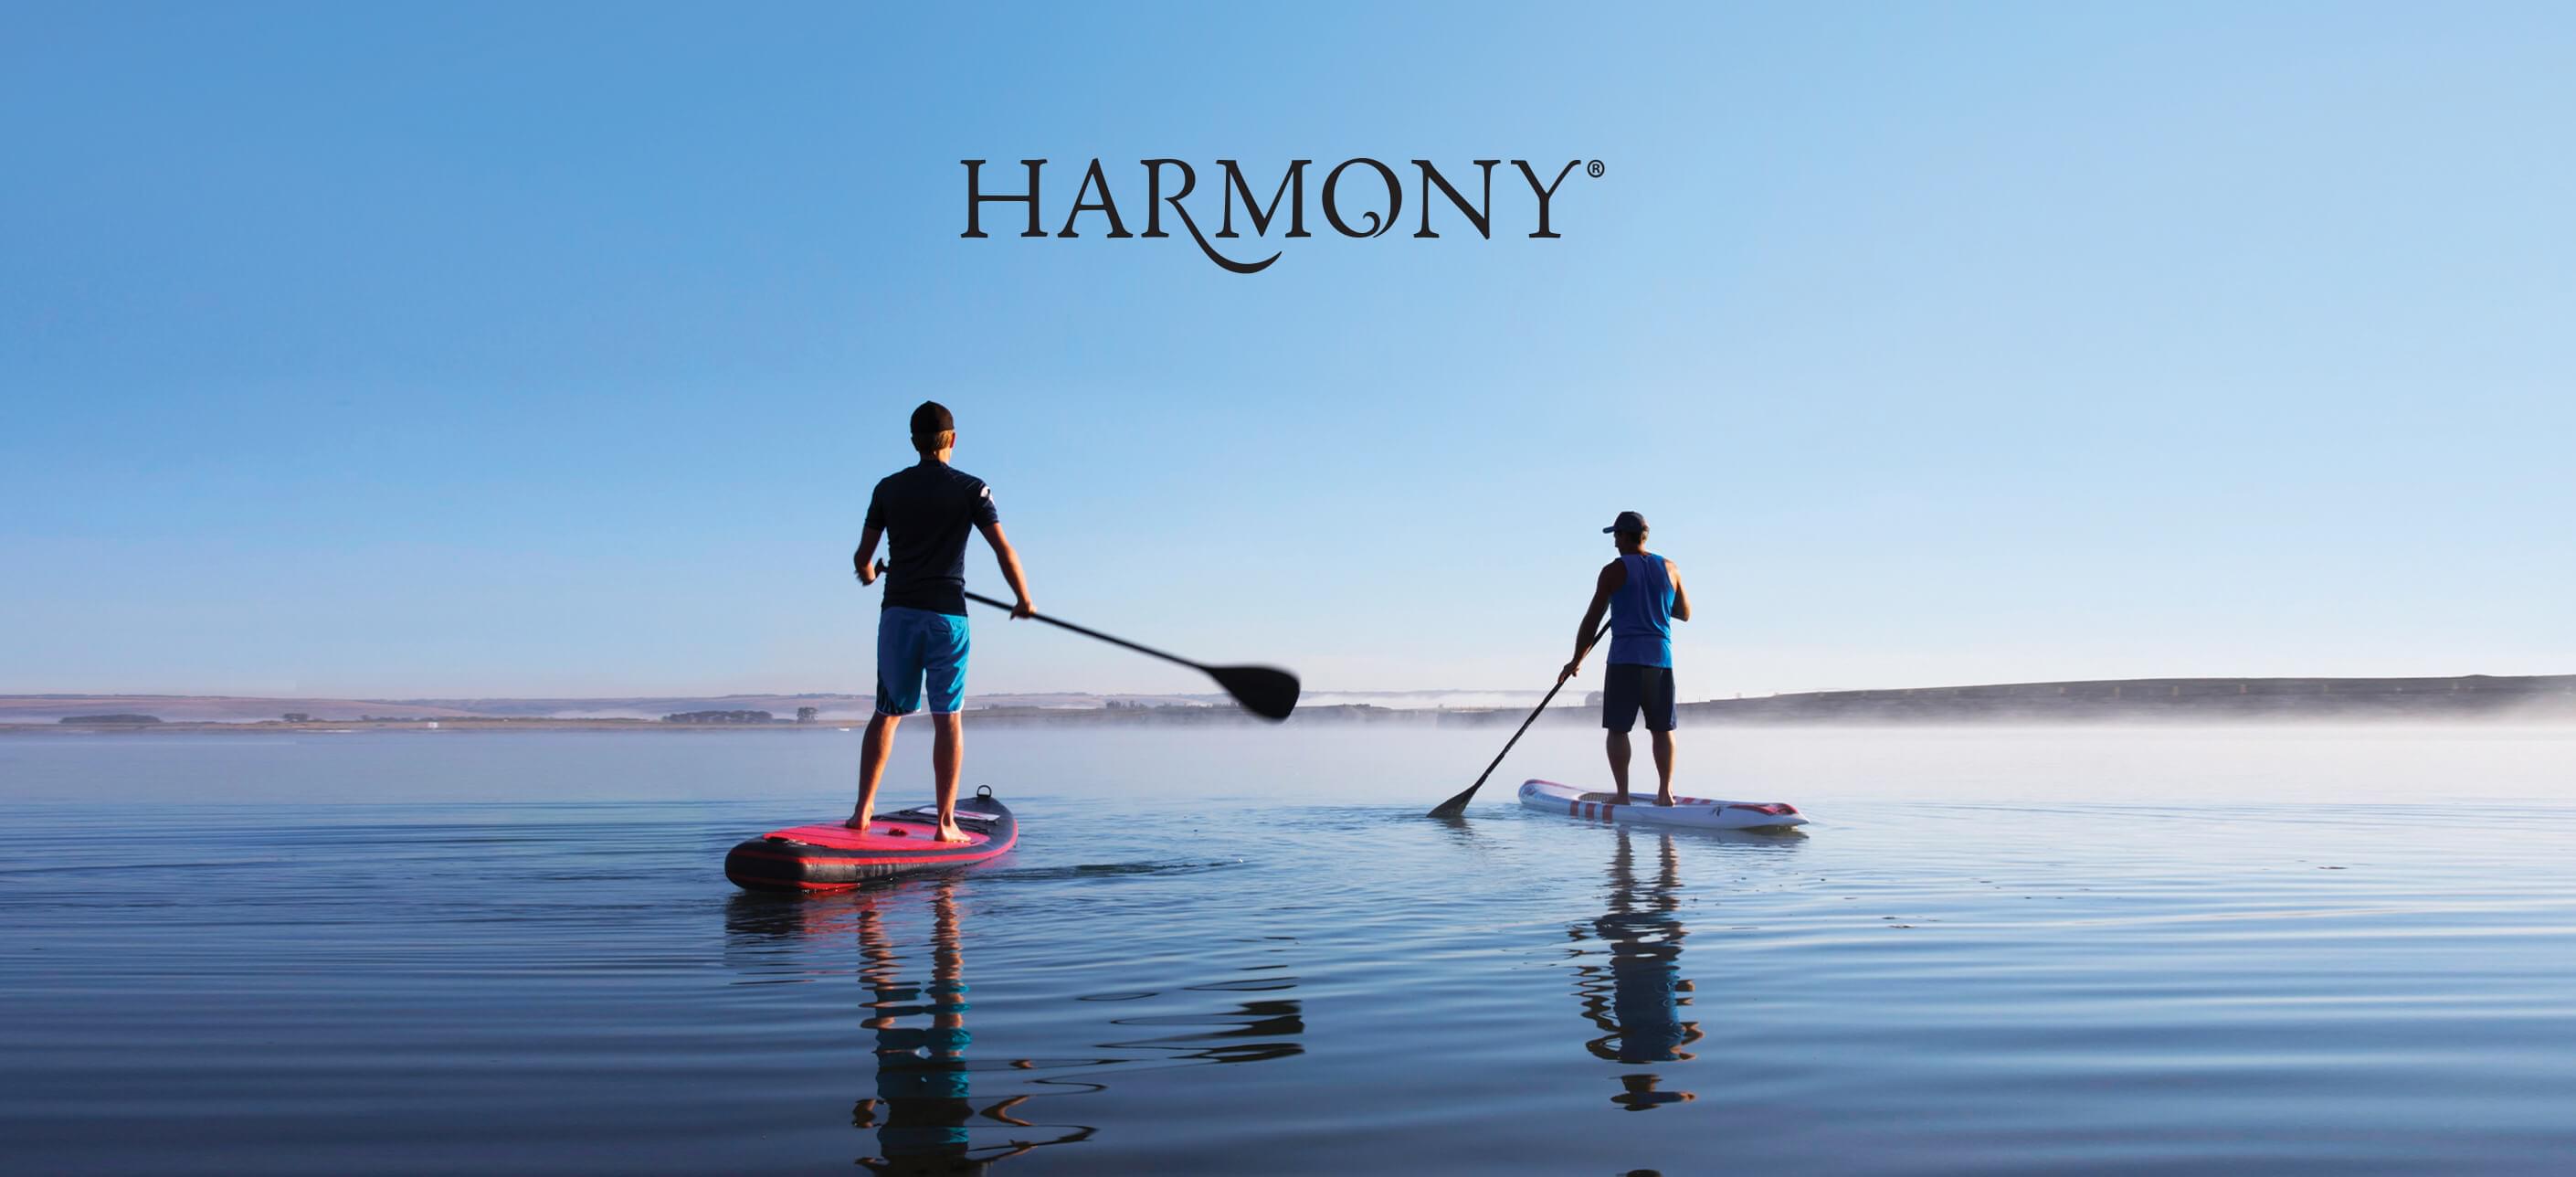 Two people stand-up paddleboarding